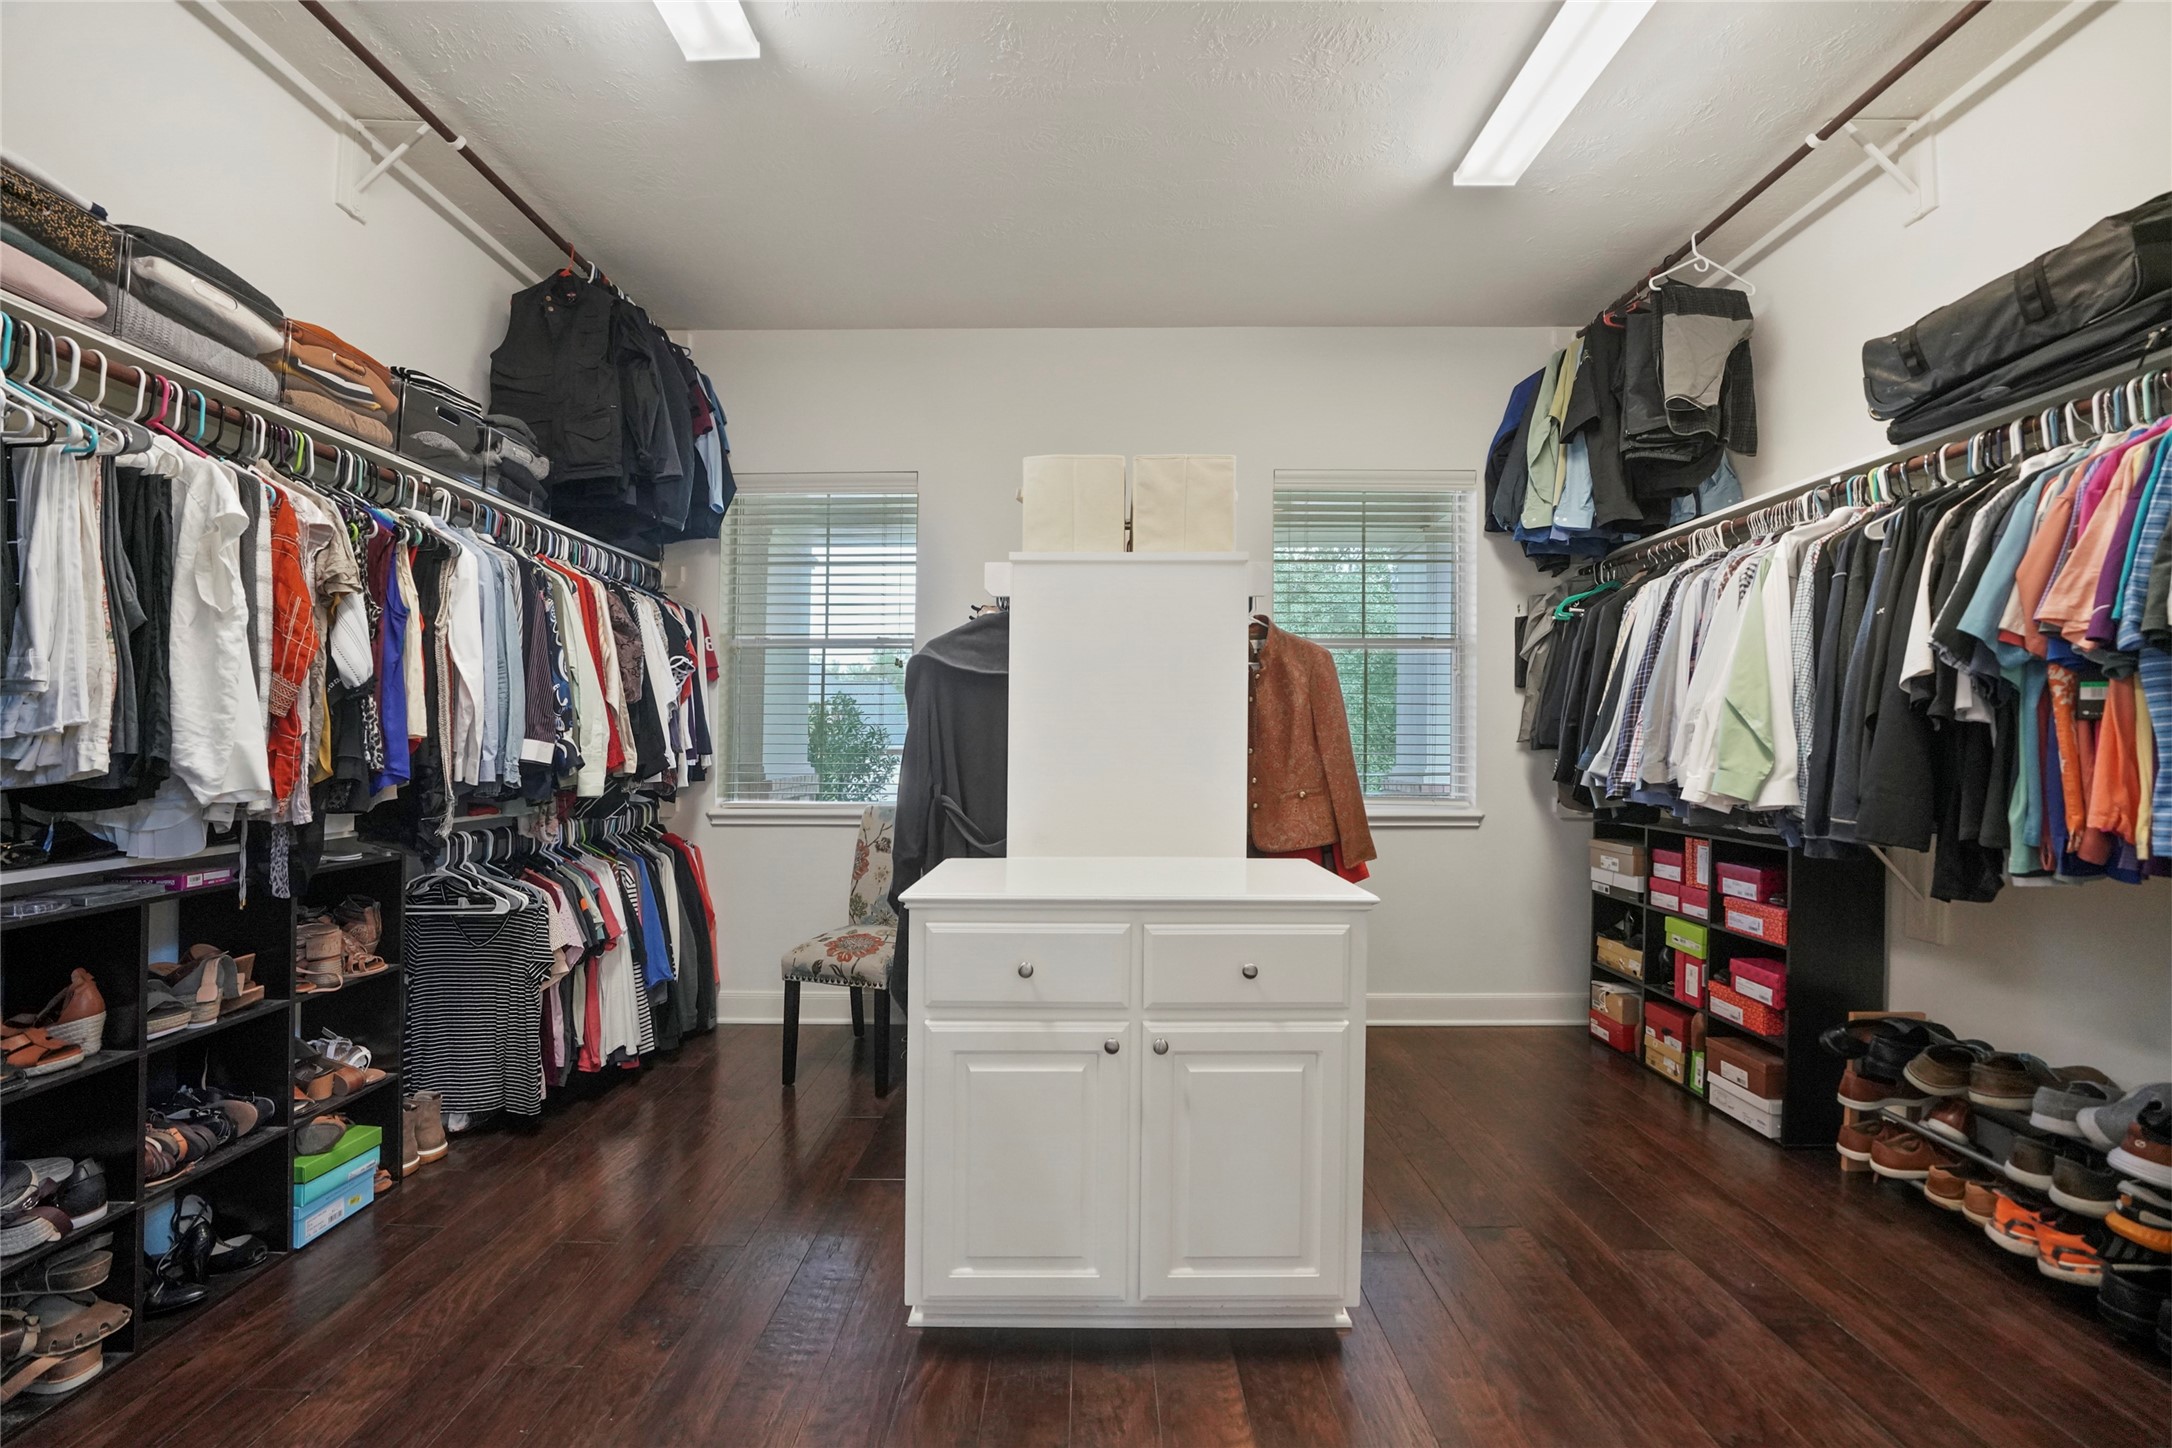 The storage offered in this home is amazing as showcased by the Primary walk-in closet.